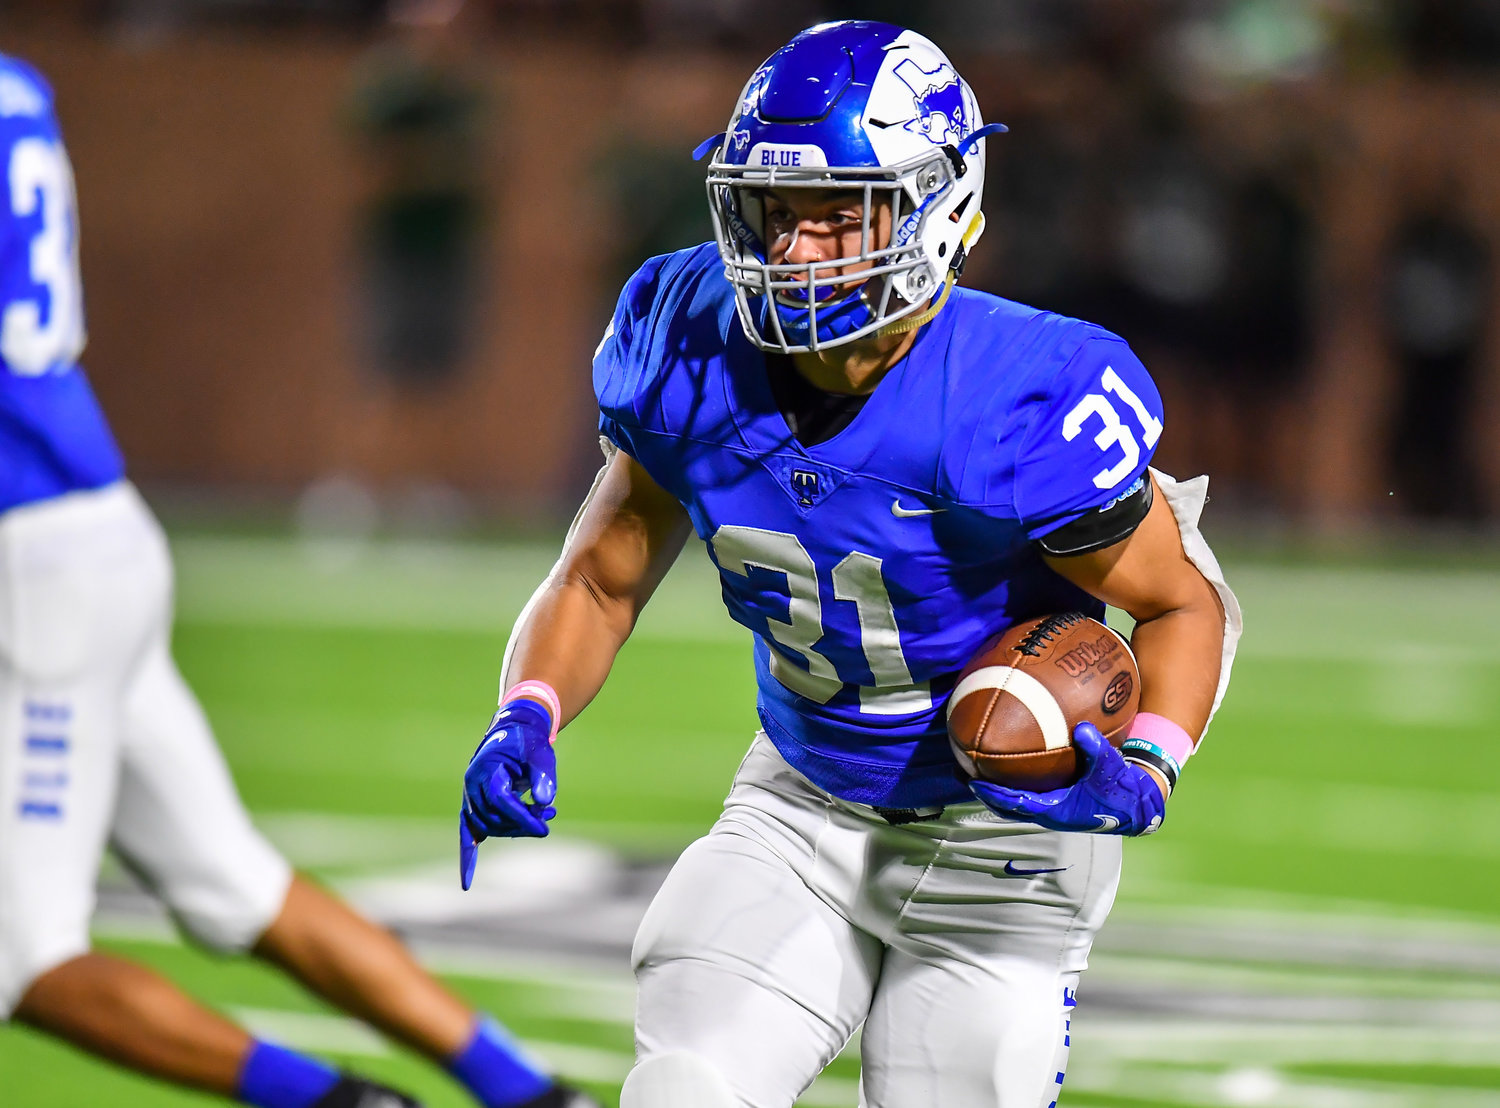 Katy, Tx. Oct 15, 2021: Katy Taylors Andrew Meza #31 carries the ball to the outside during a conference game between Mayde Creek and Katy Taylor at Rhodes Stadium. (Photo by Mark Goodman / Katy Times)